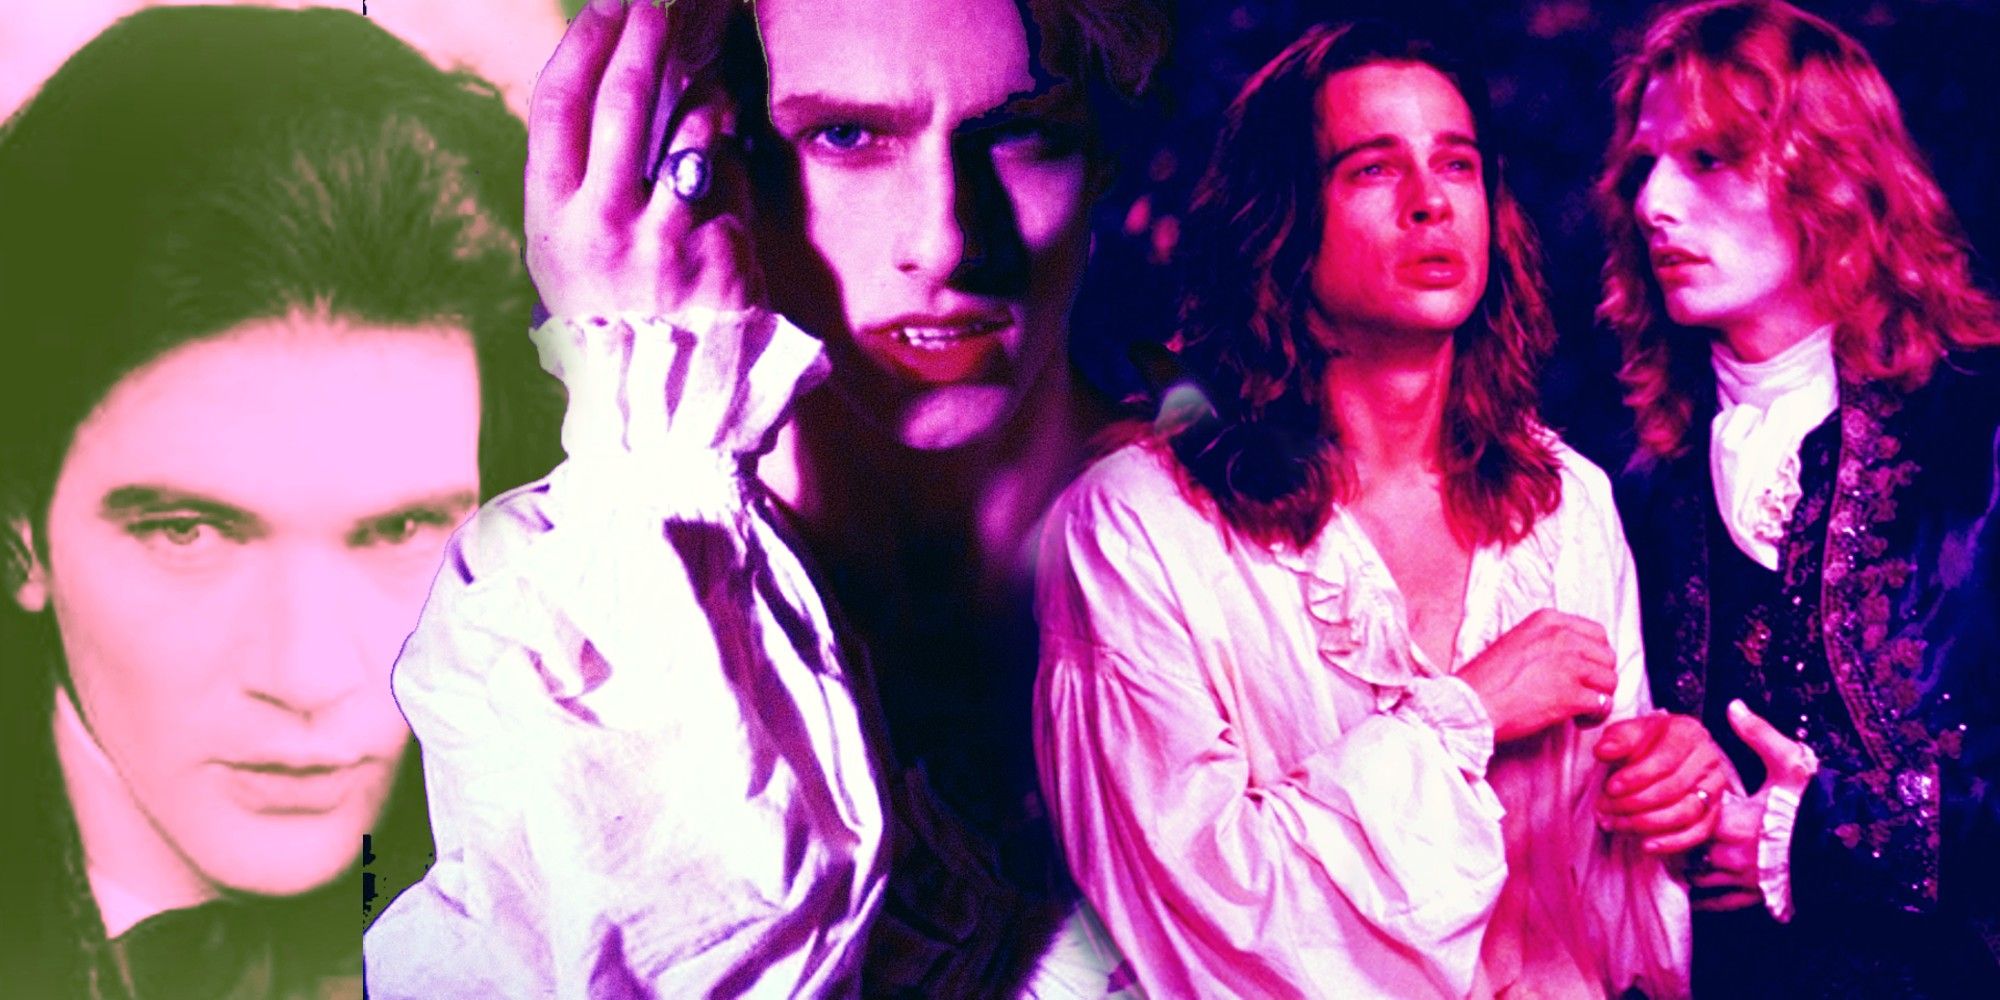 Collage of Antonio Banderas as Armand, Tom Cruise as Lestat, and Brad Pitt as Louis in Interview with the Vampire